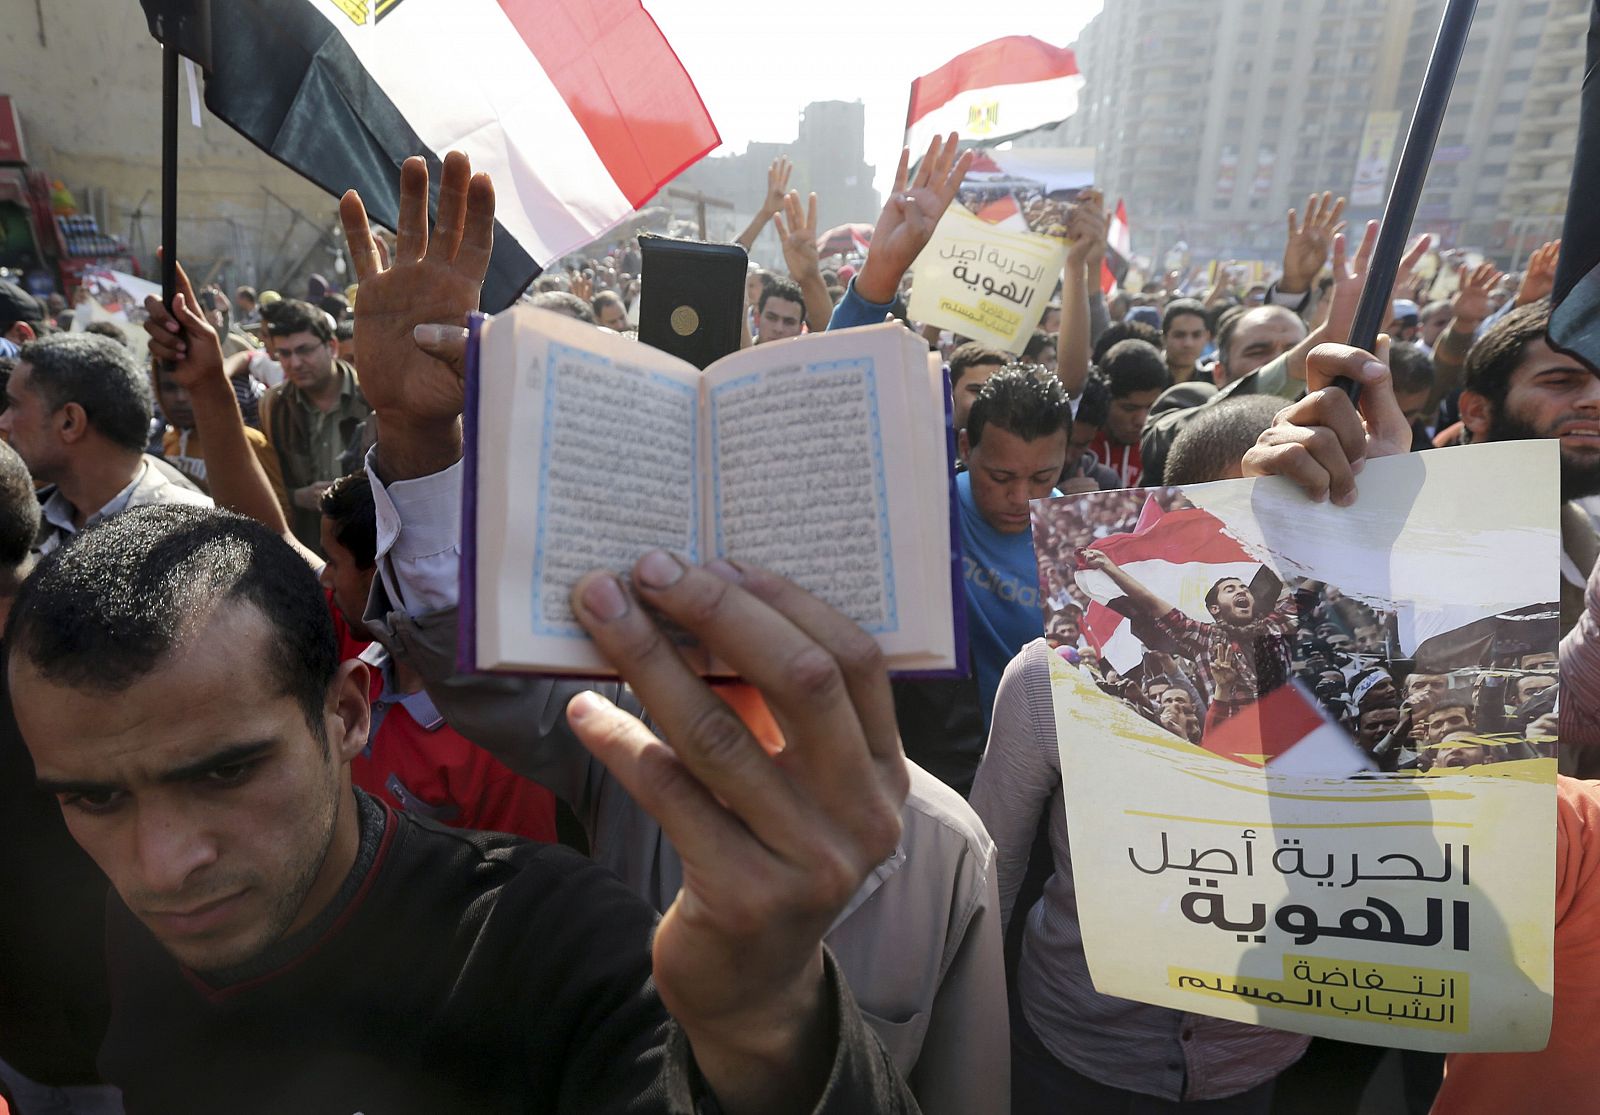 Supporters of the Muslim Brotherhood and ousted Egyptian President Mohamed Mursi shout slogans against he military and interior ministry and rise copies of the Koran t, during a protest in the Cairo suburb of Matariya